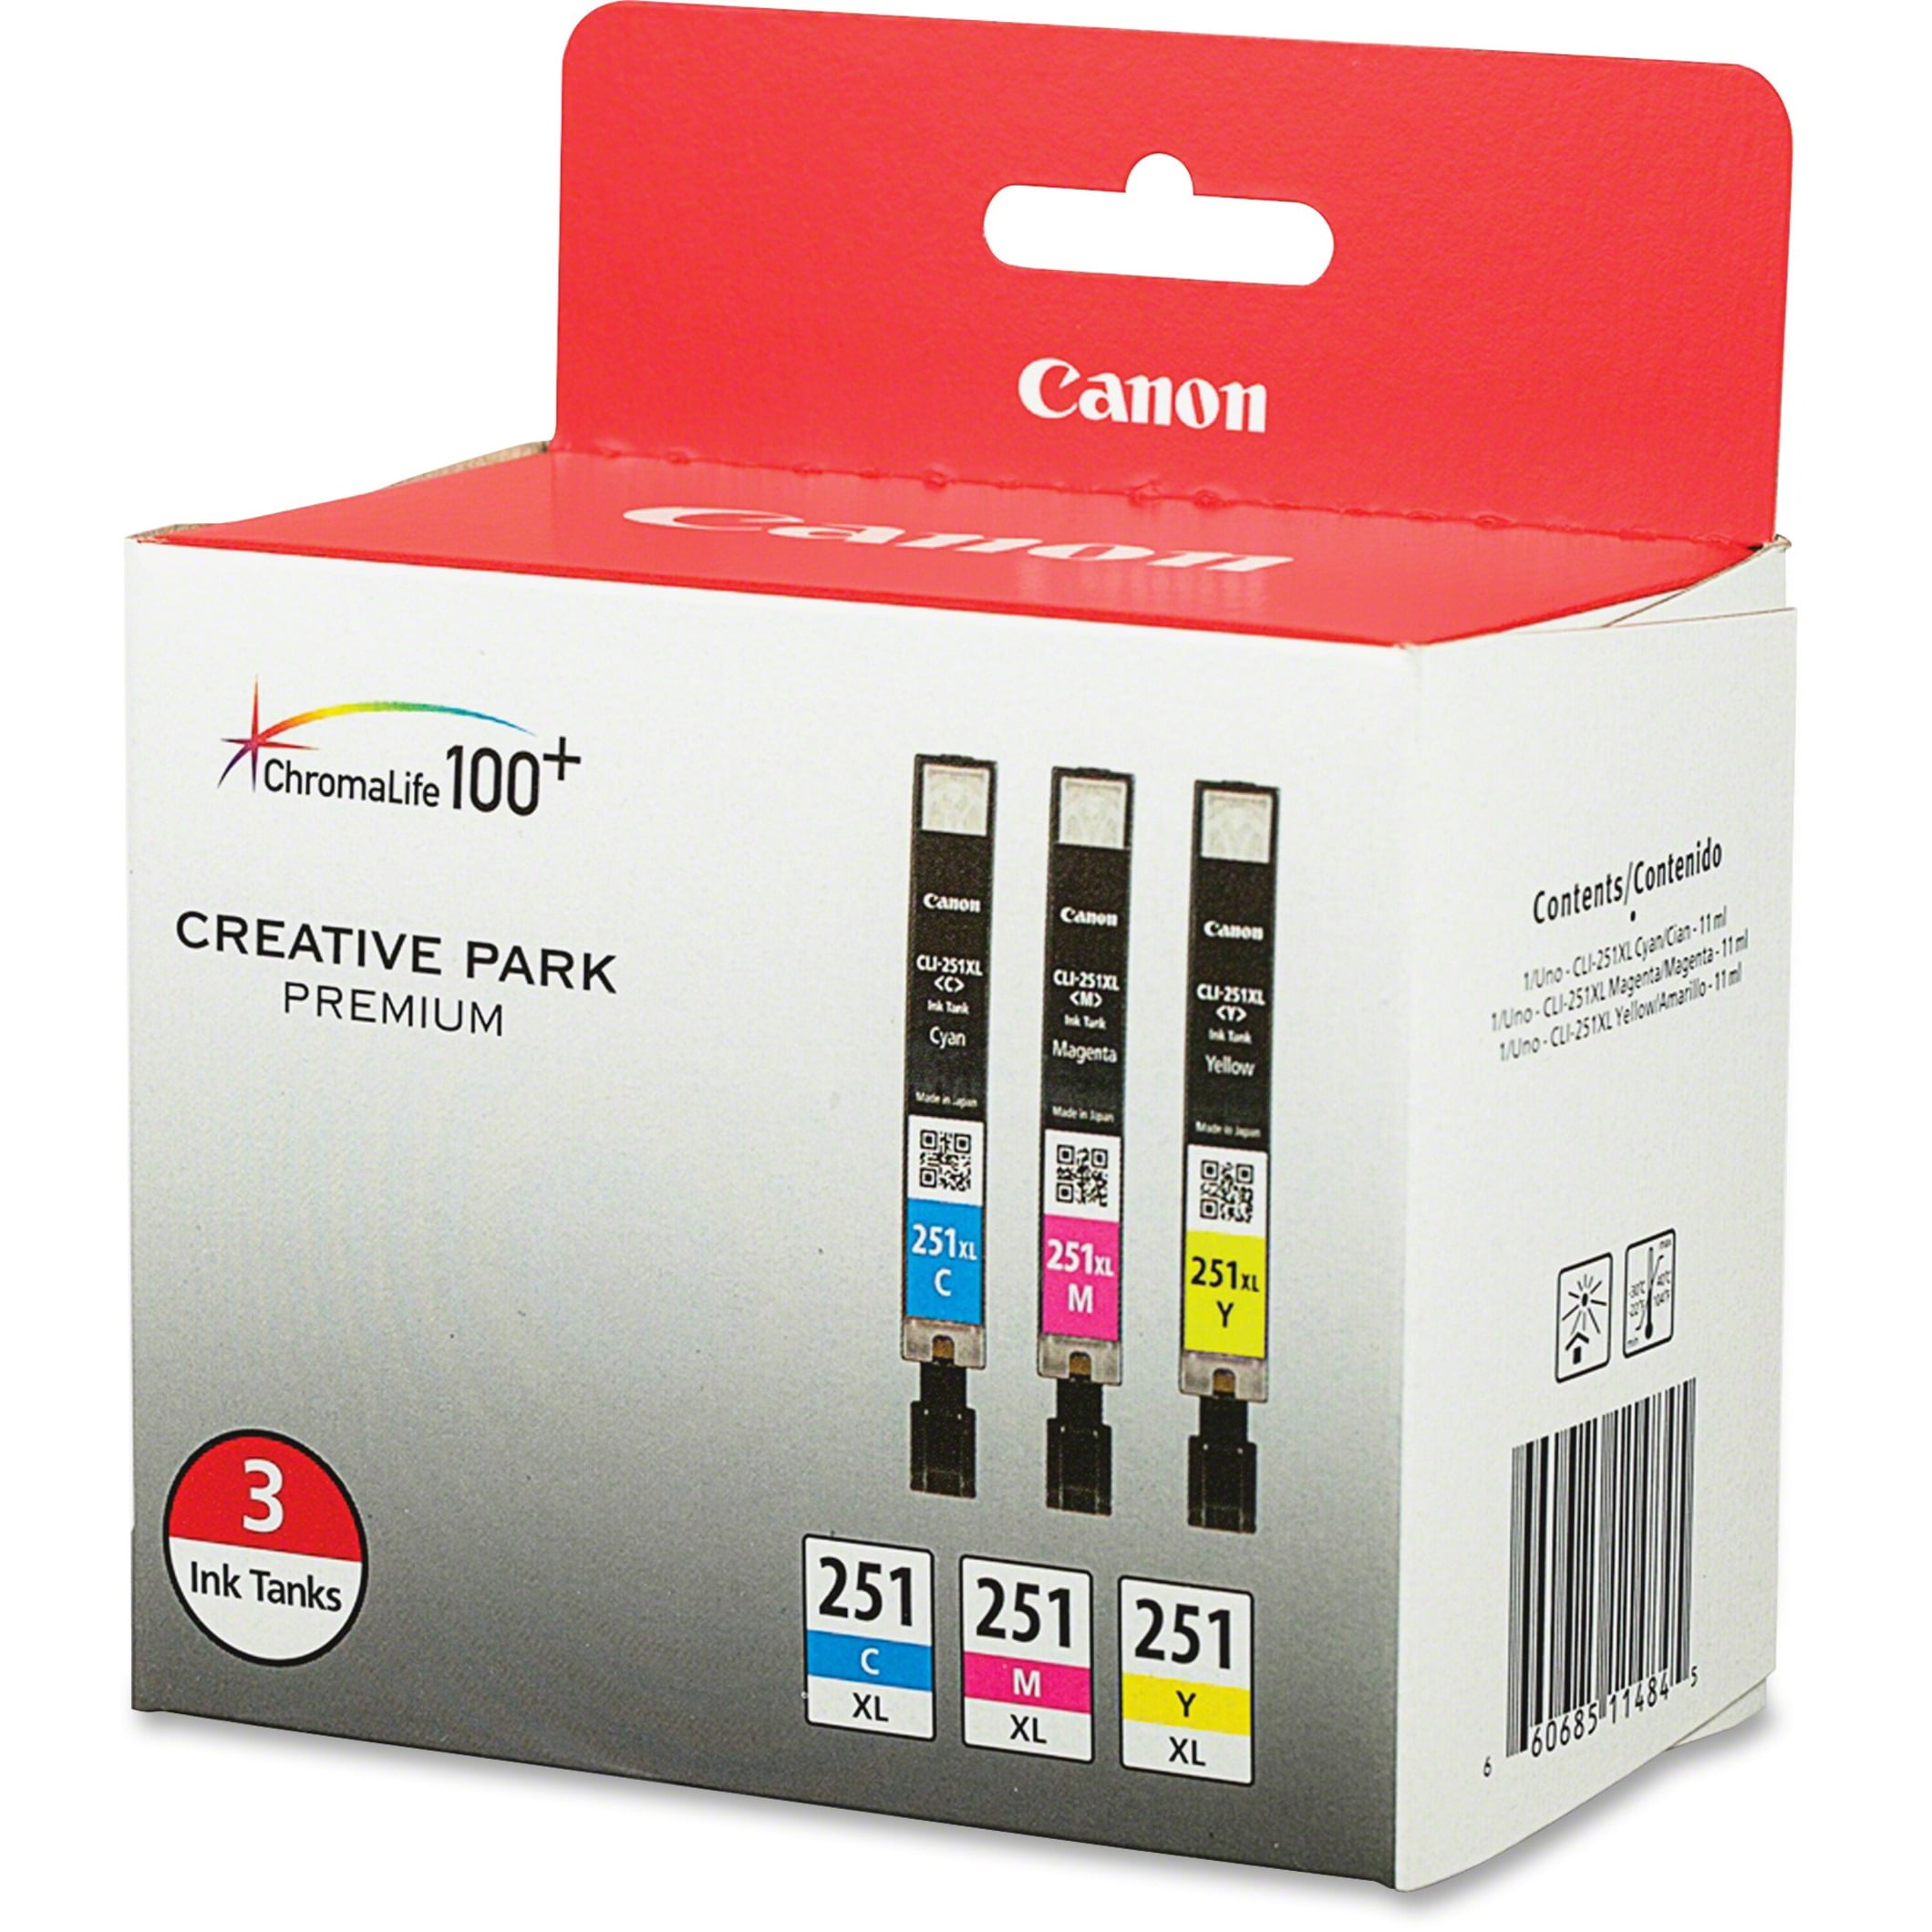 Compatible Canon CLI-526 CMYK Multipack Ink Cartridges (4540B001 / 4541B001  / 4542B001 / 4543B001) - Canon ip4850 Pixma ink - Canon PIXMA iP - Canon  Ink - Ink Cartridges - PremiumCompatibles 